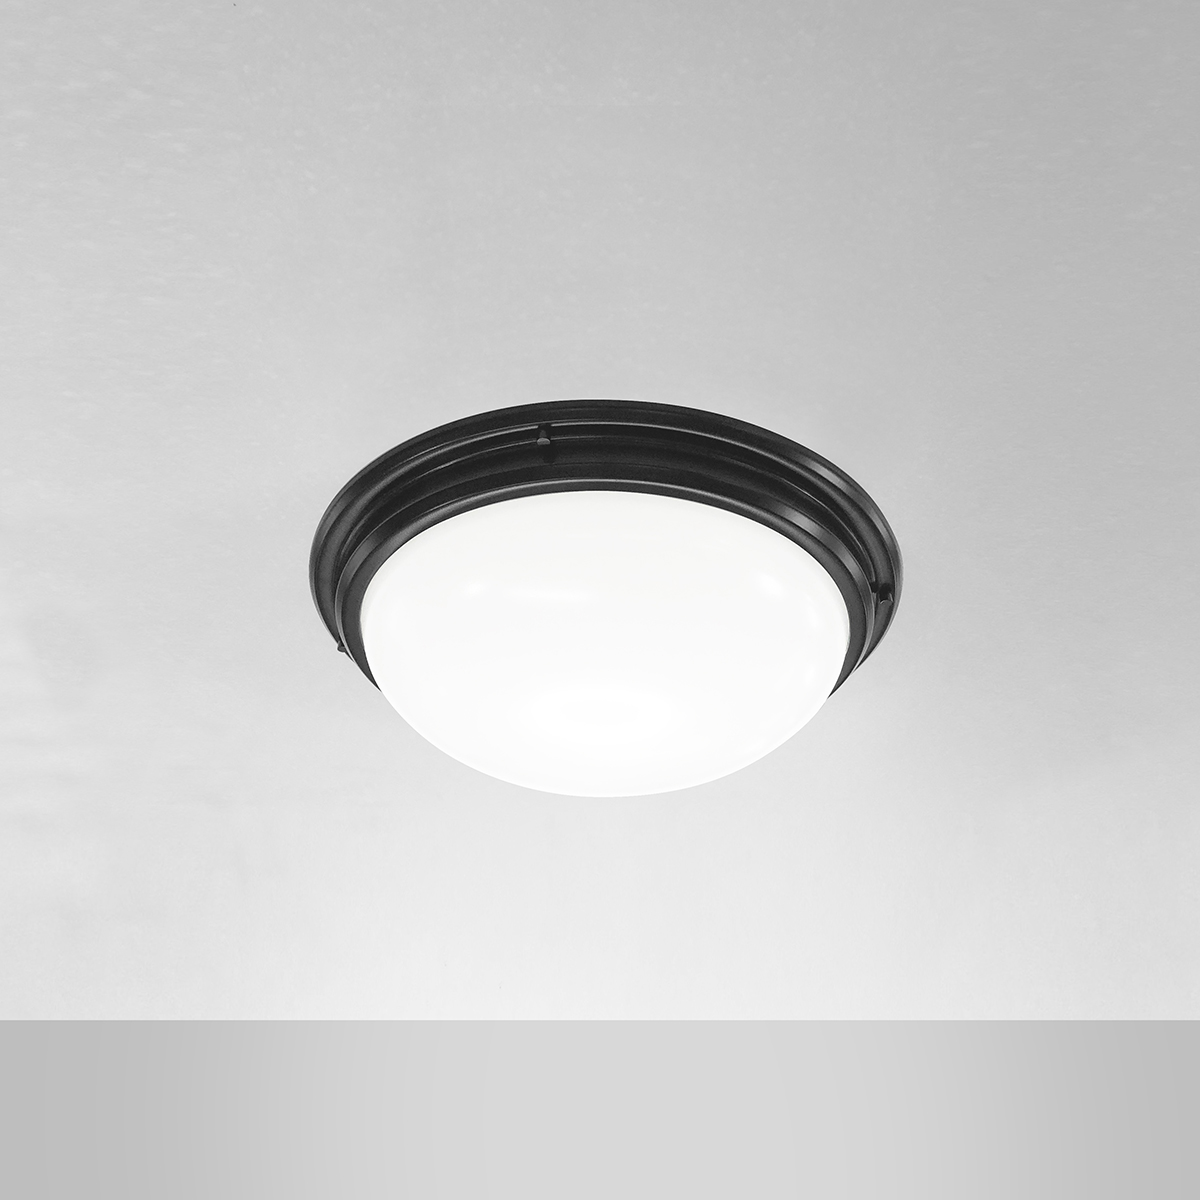 A ceiling-mounted bowl fixture